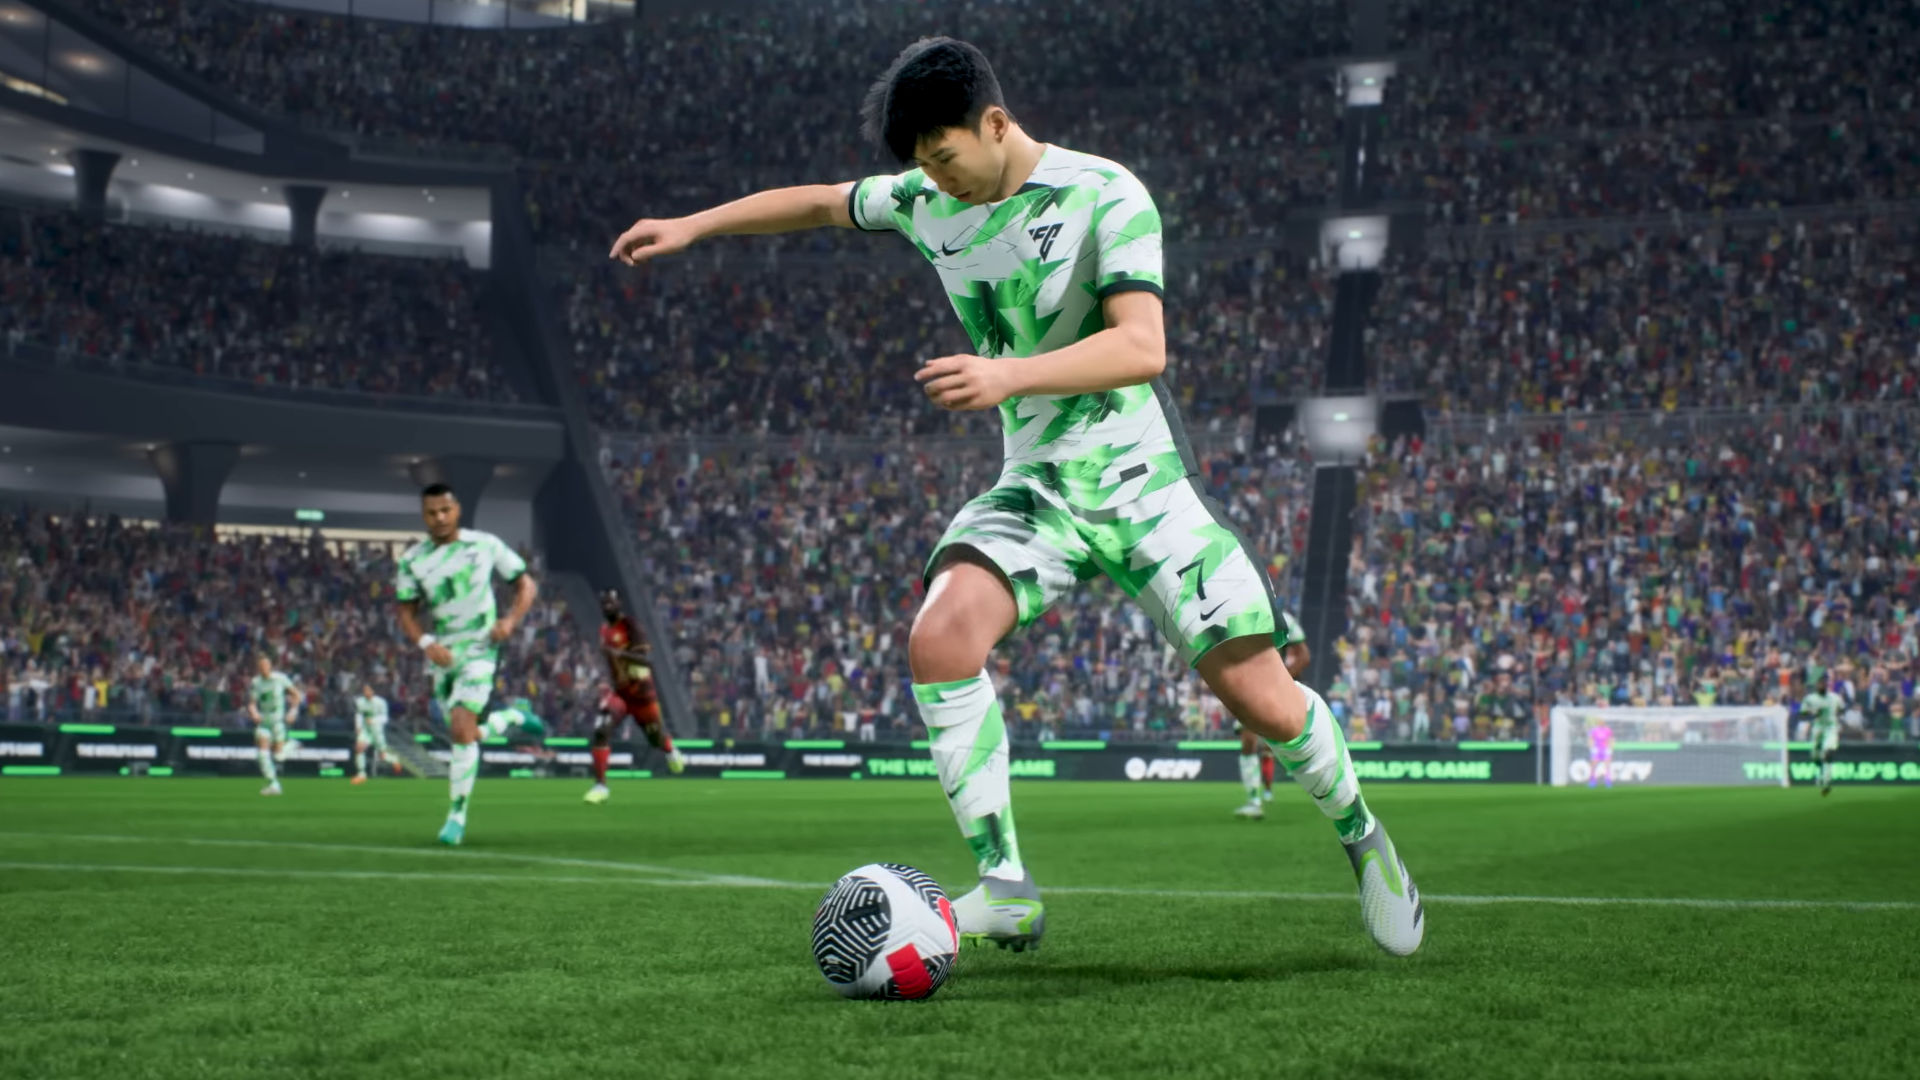 Best FC 24 Ultimate Team tips and tricks to build a great squad